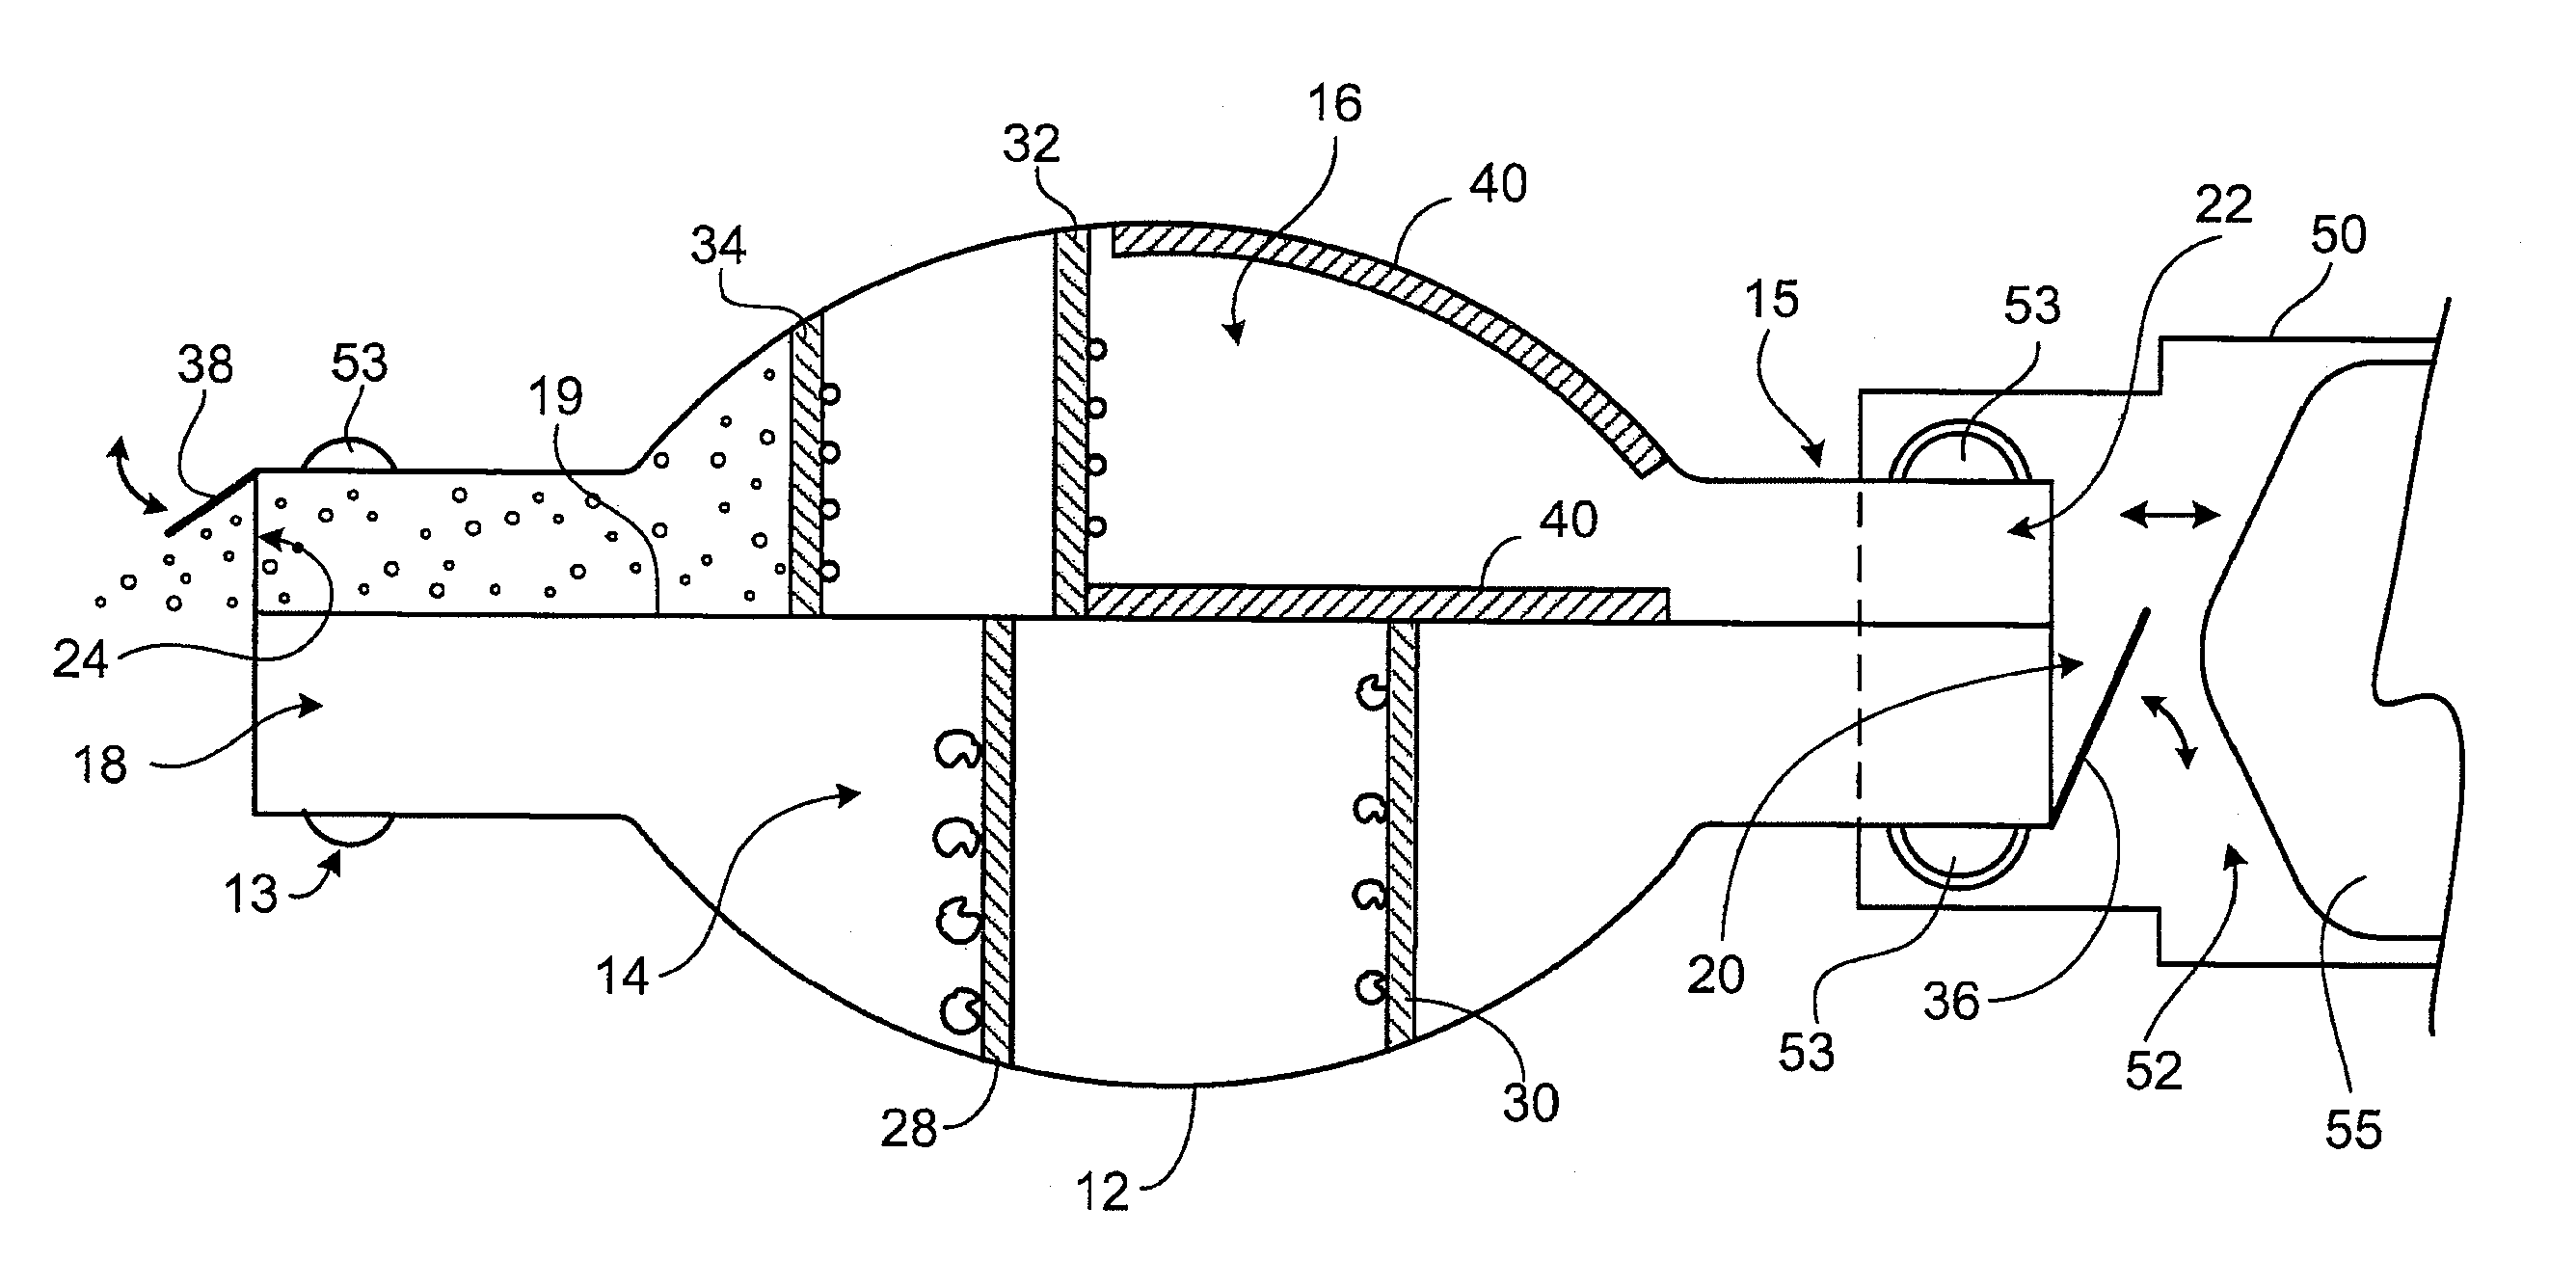 Sample preparation device and method